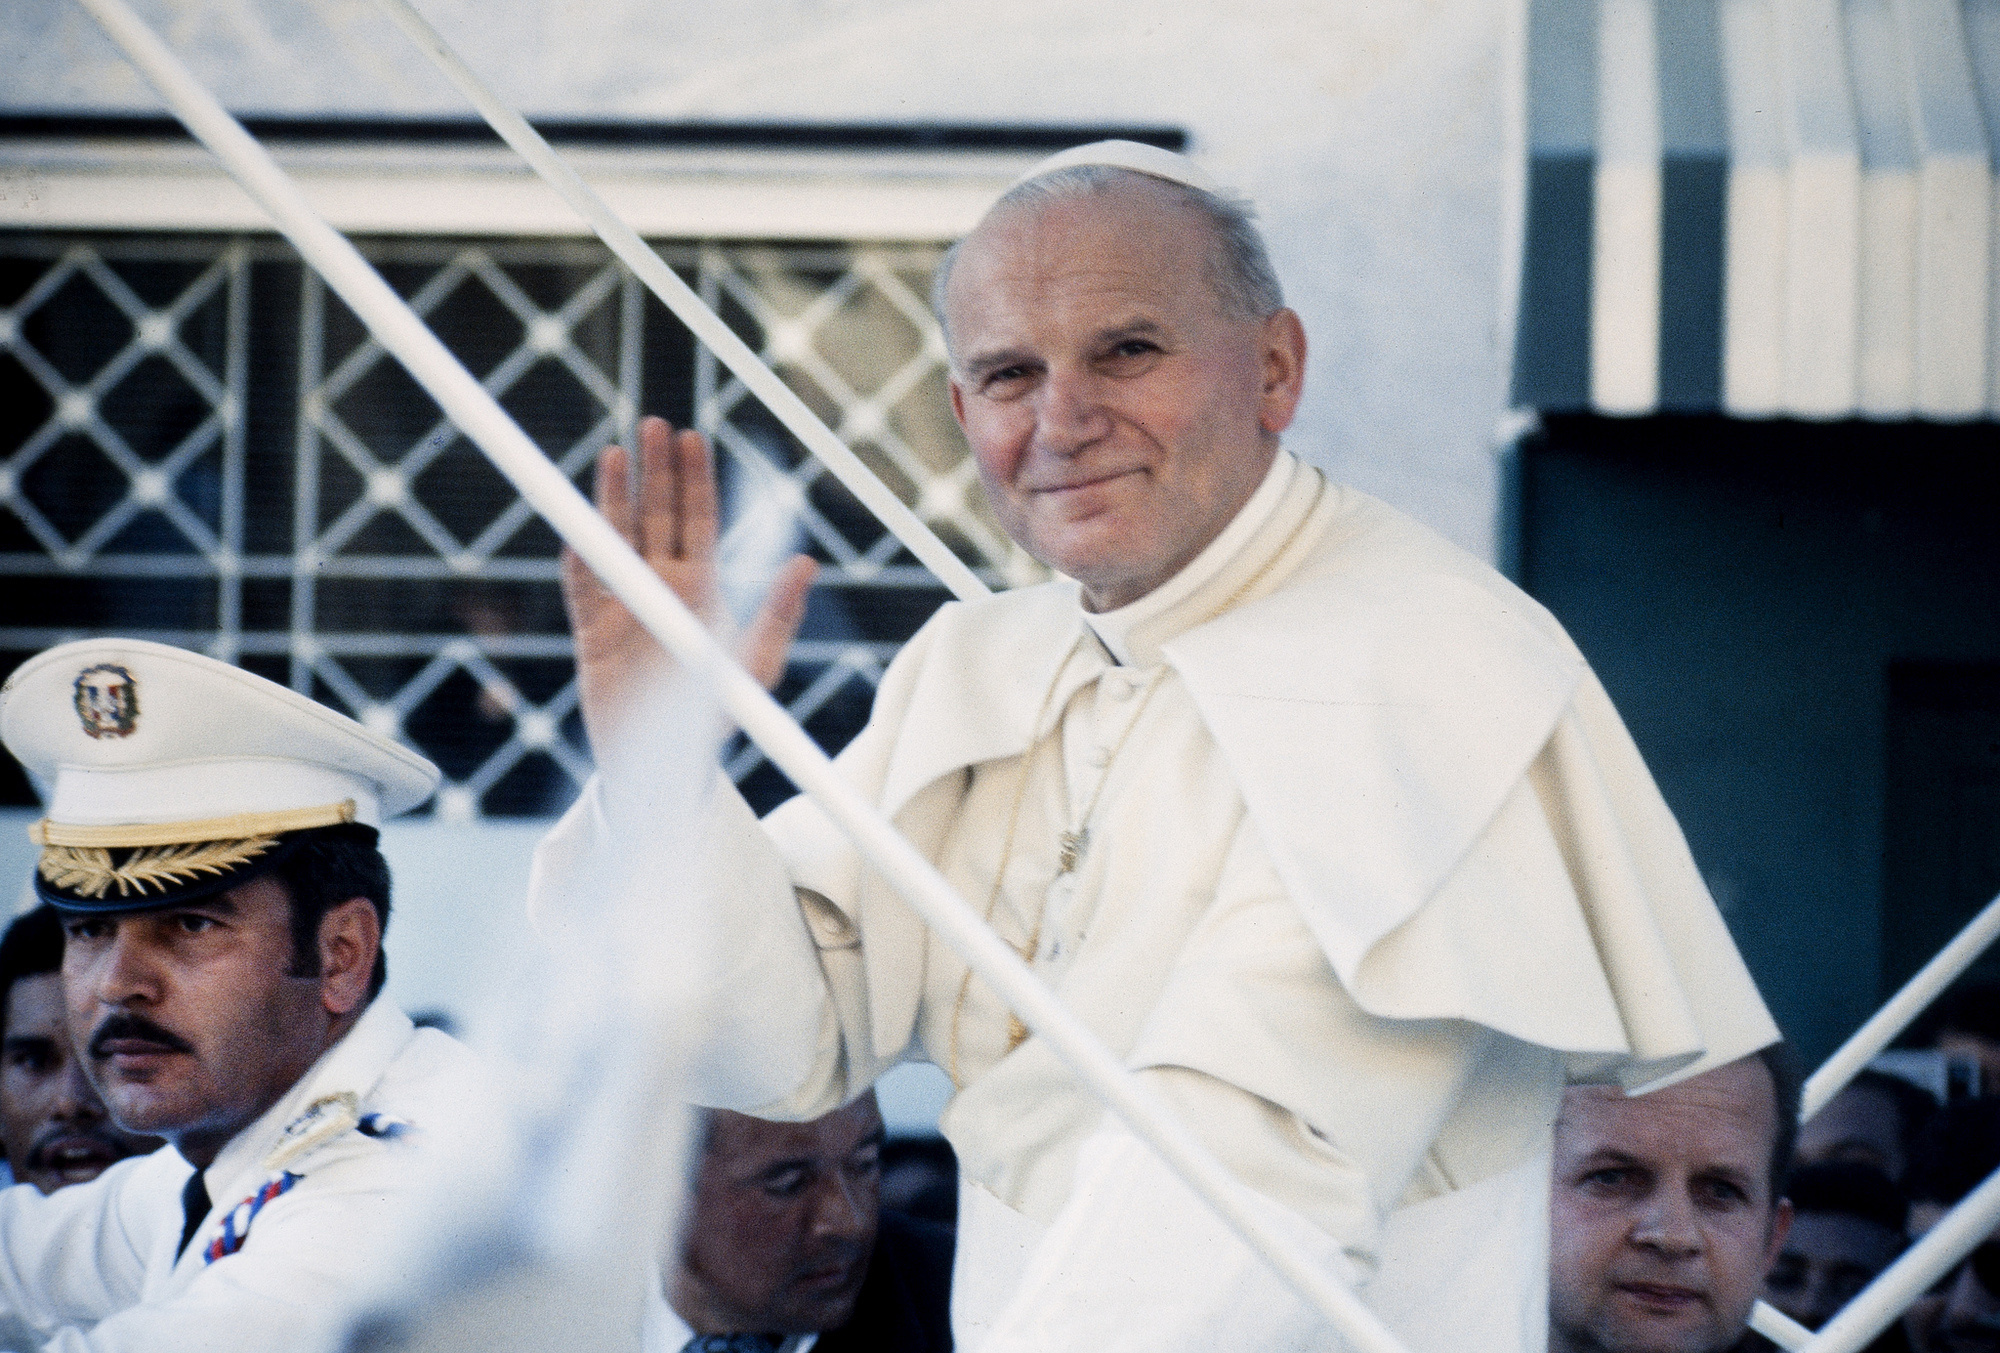 Most popes lead a very humble life, despite living in the Vatican, but John Paul II's death was a whole lot pricier.
In fact, the beloved Pope's entire funeral event ended up accruing a cost of over 8 million dollars.